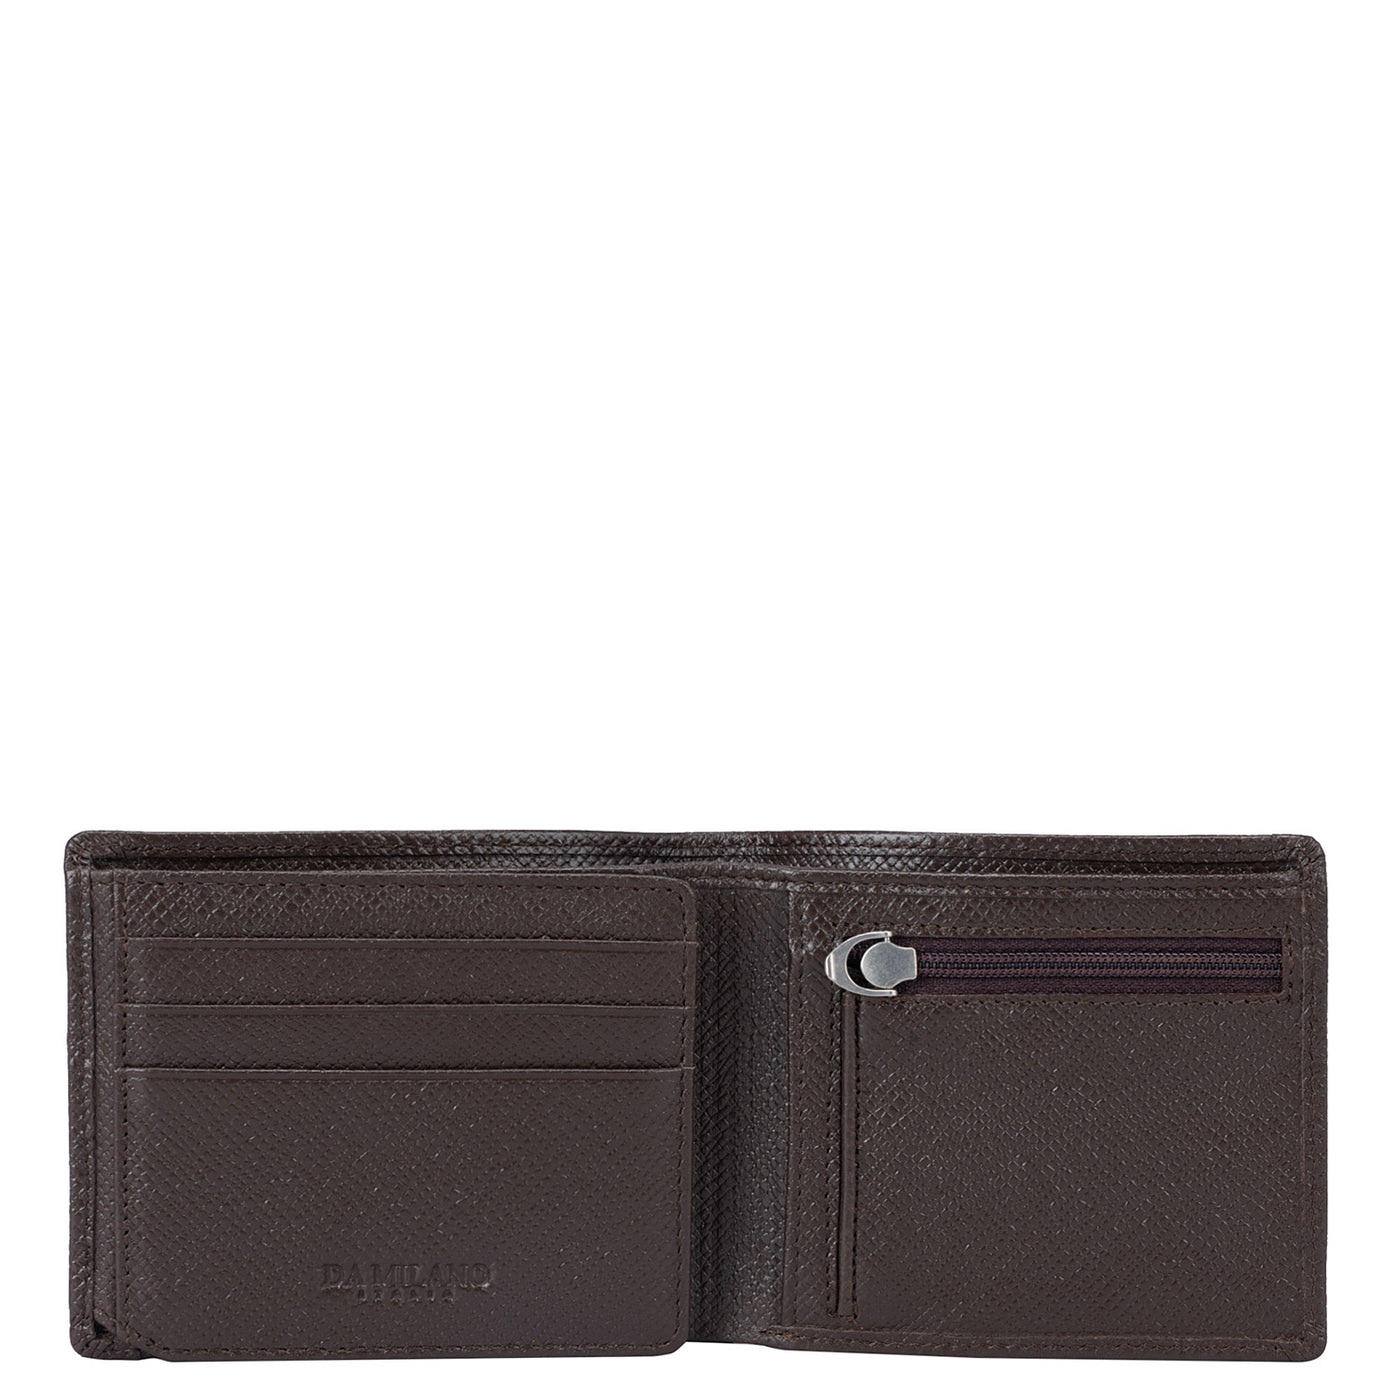 Brown Croco Leather Mens Wallet & Keychain Gift Set